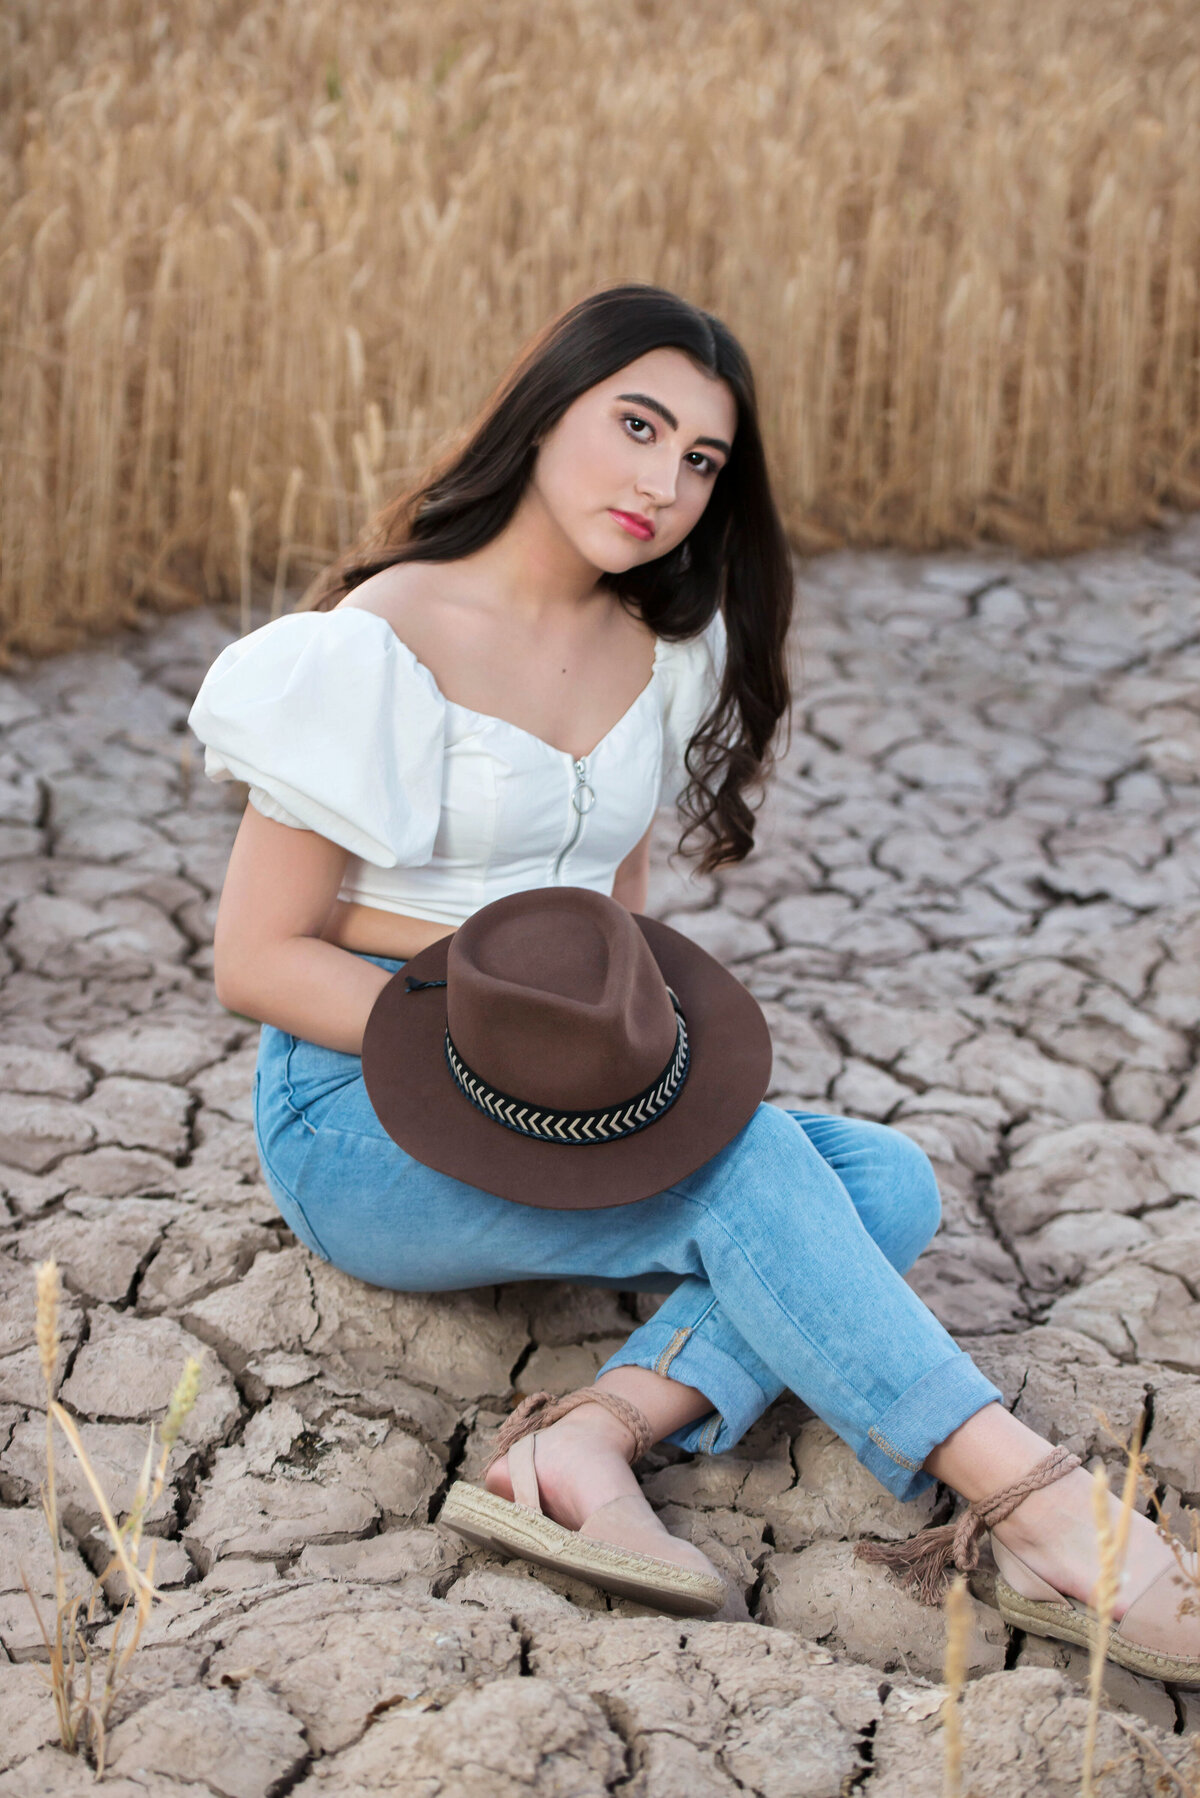 senior with hat in dirt